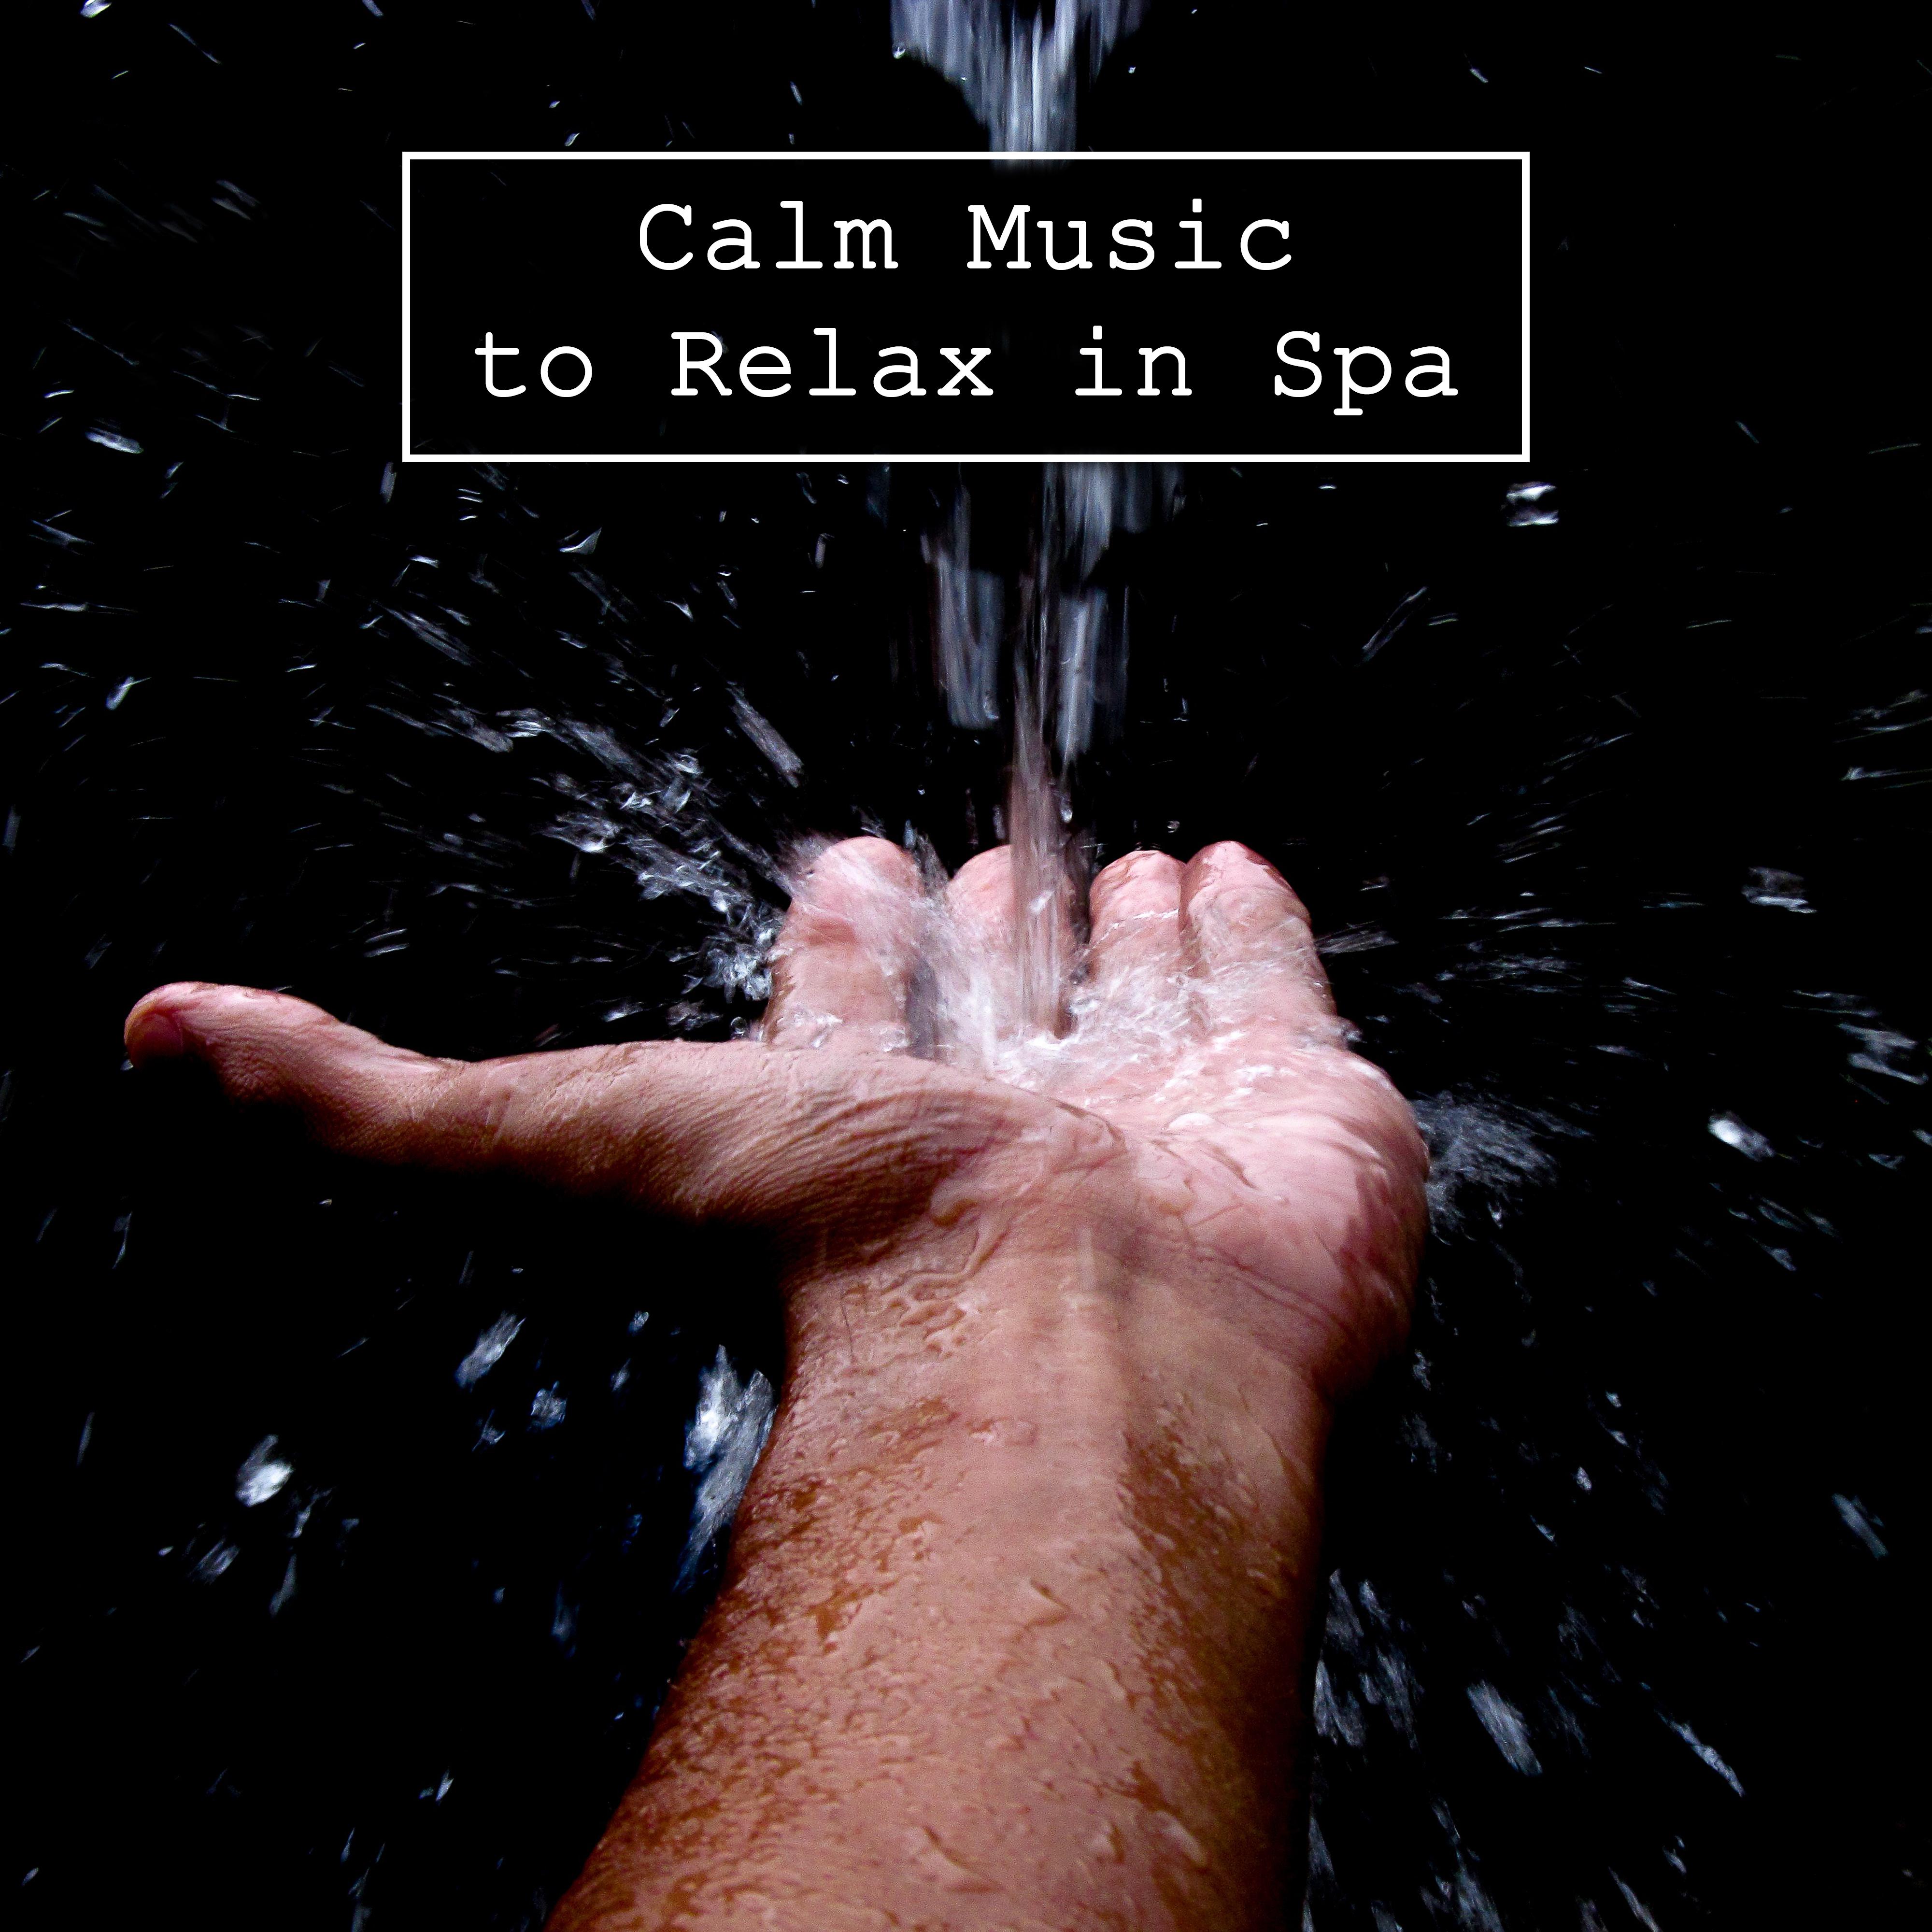 Calm Music to Relax in Spa  Soothing Waves, Spa Music, Relaxing Sounds, Spa Hotel, Hot Stone Massage